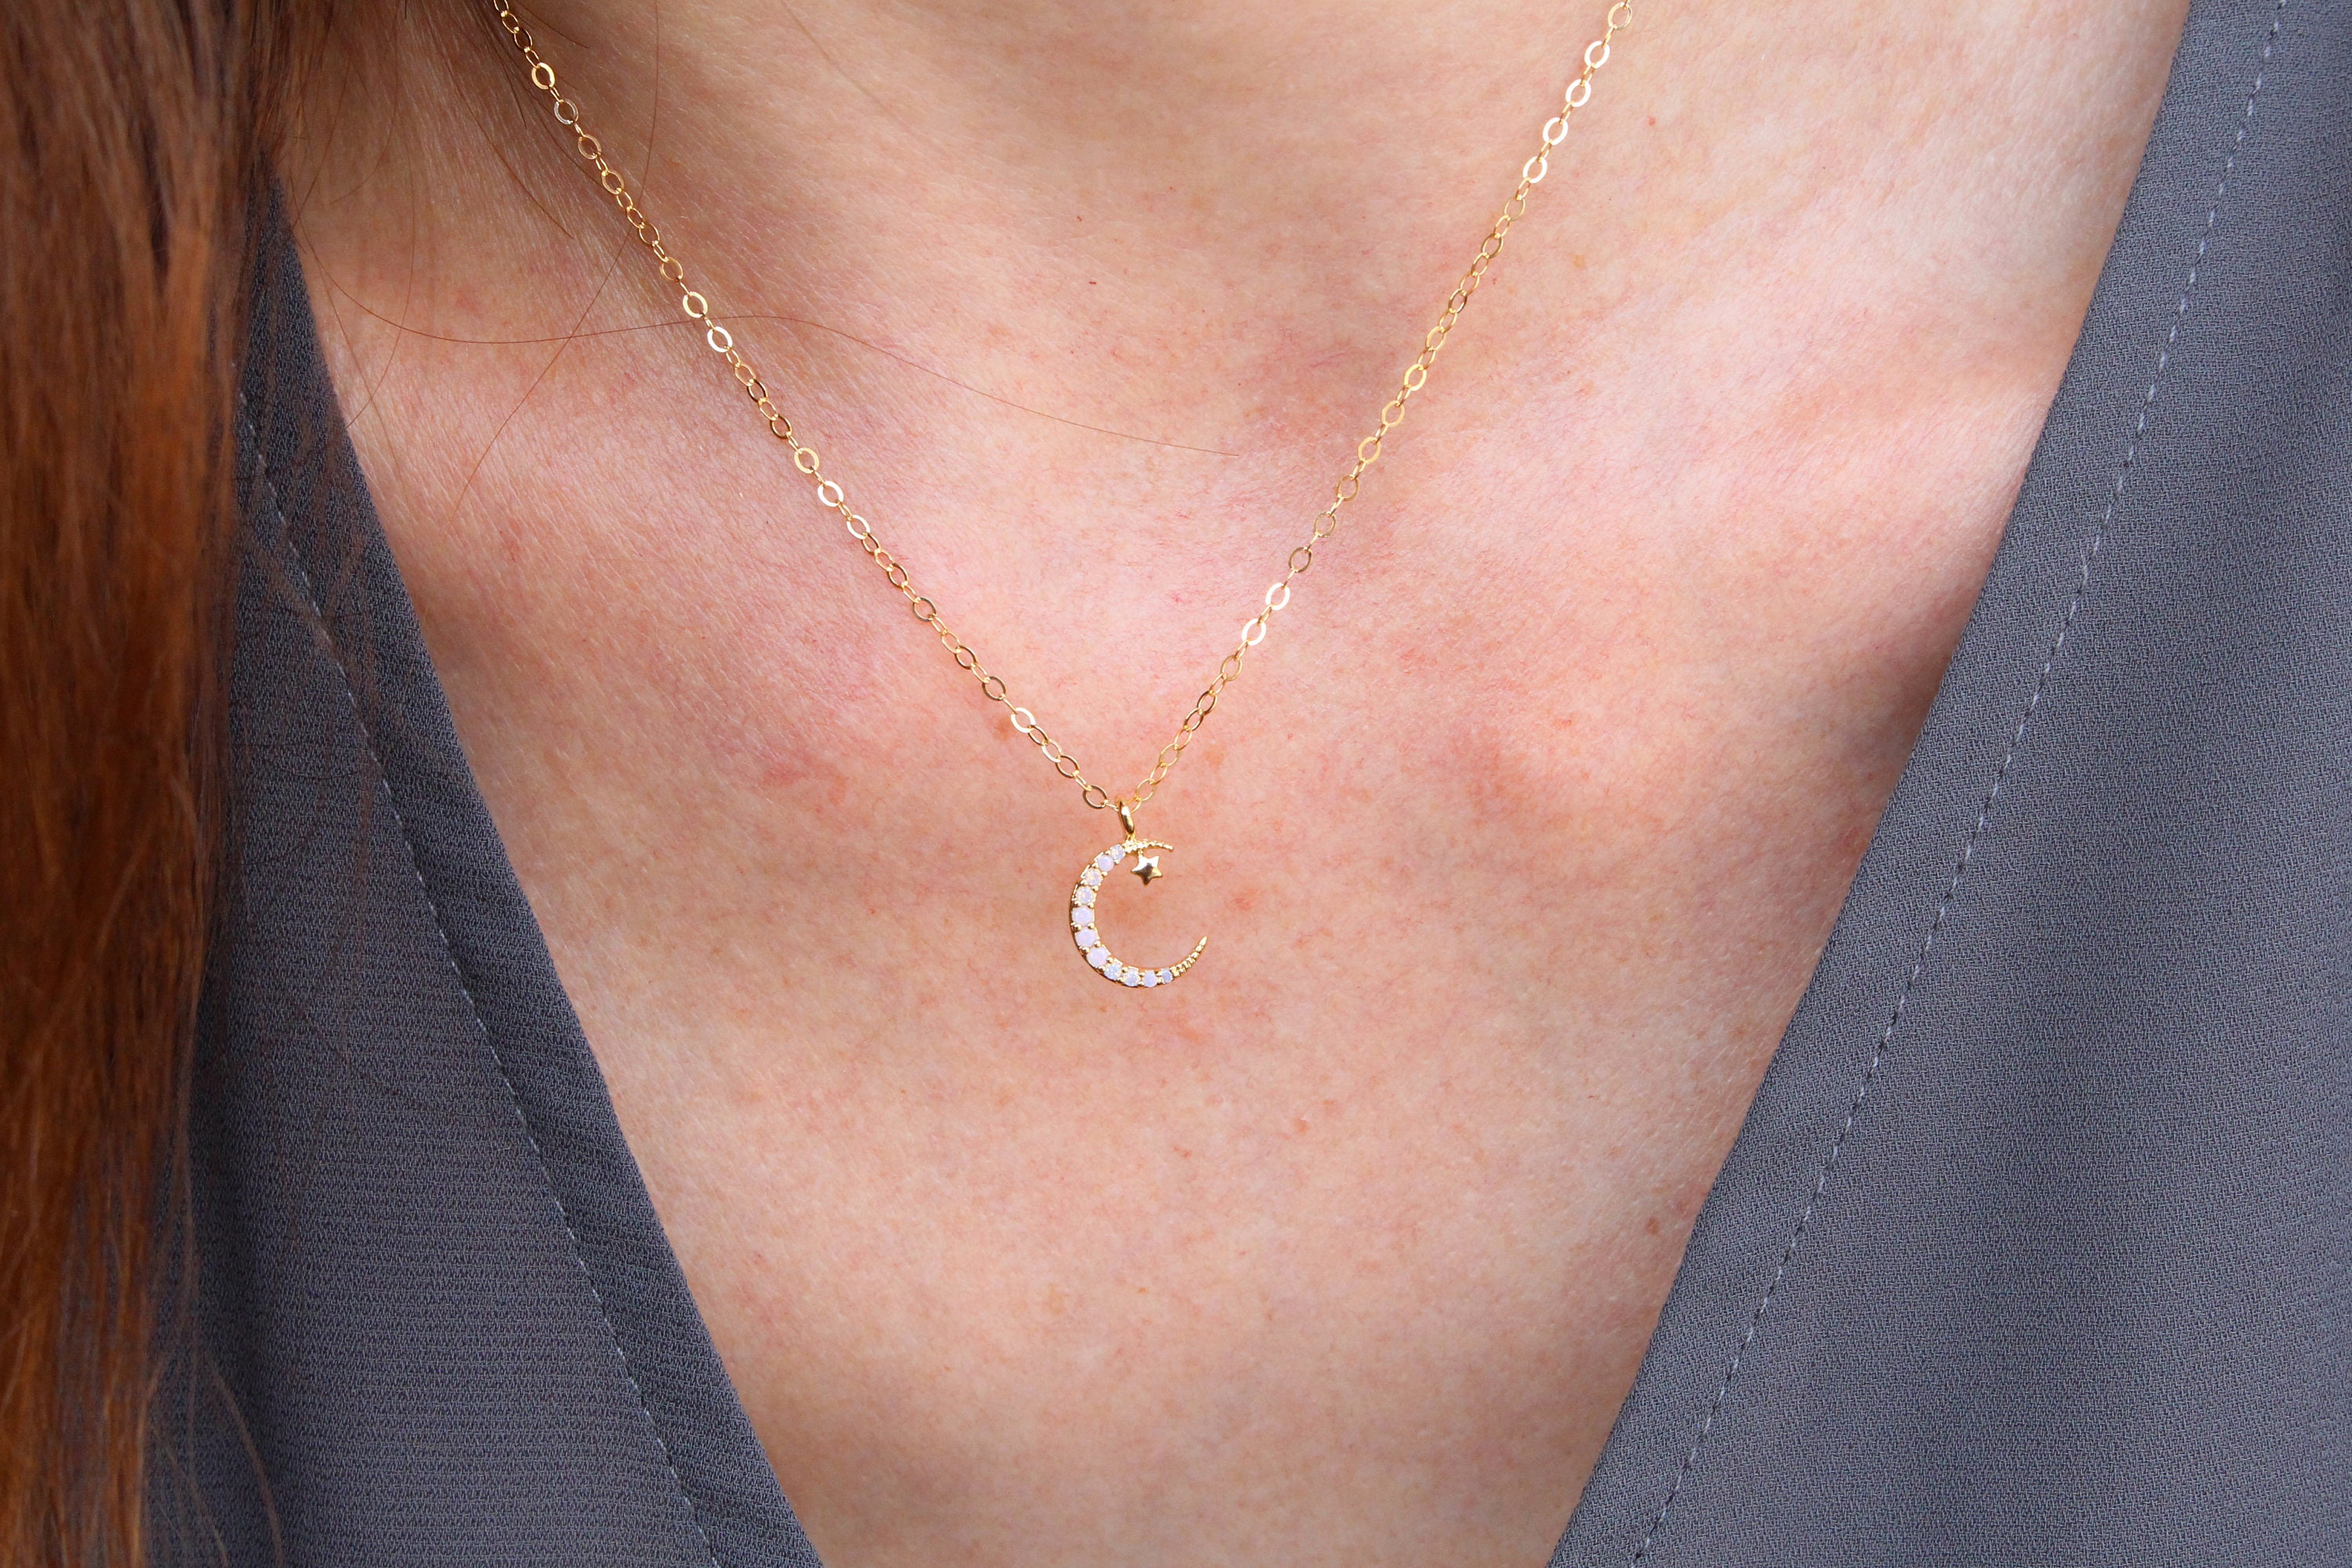 Minimalist Jewelry Gift for Her Delicate Tiny Charm Necklace Layering Necklace Dainty Moon and Star Necklace Star Necklace,Moon Necklace